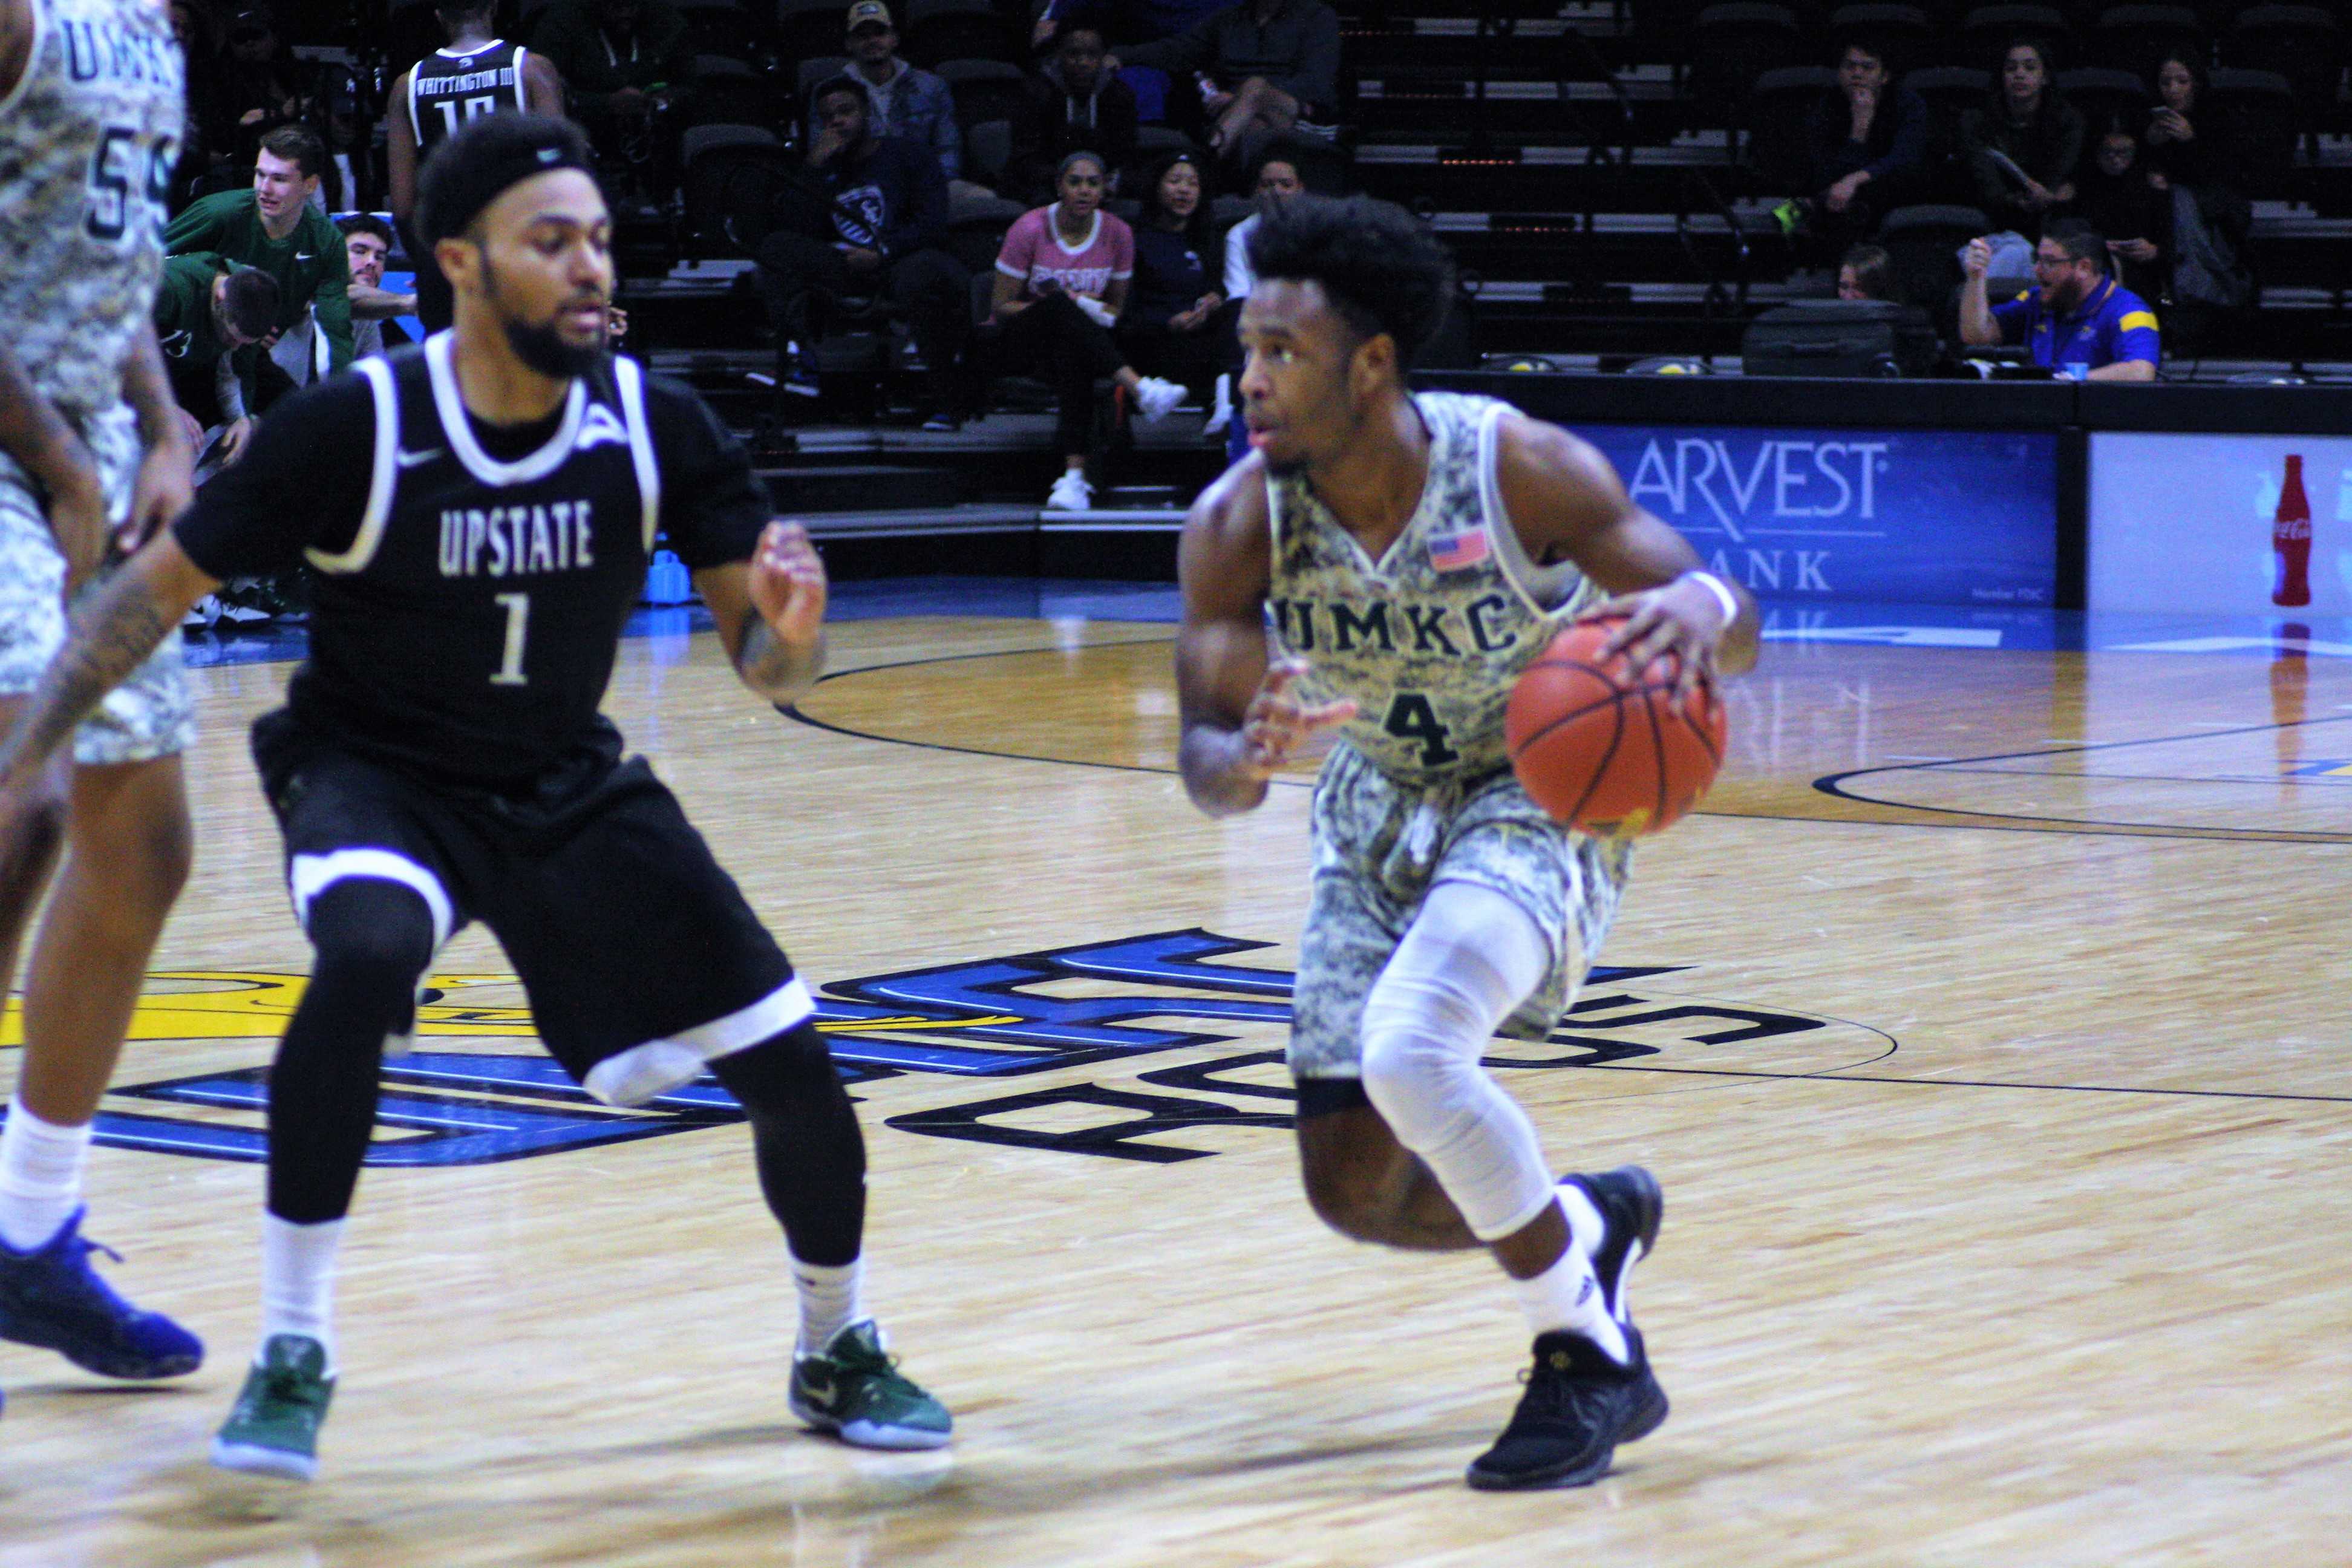 LaVell Boyd led the Roos with 16 points.